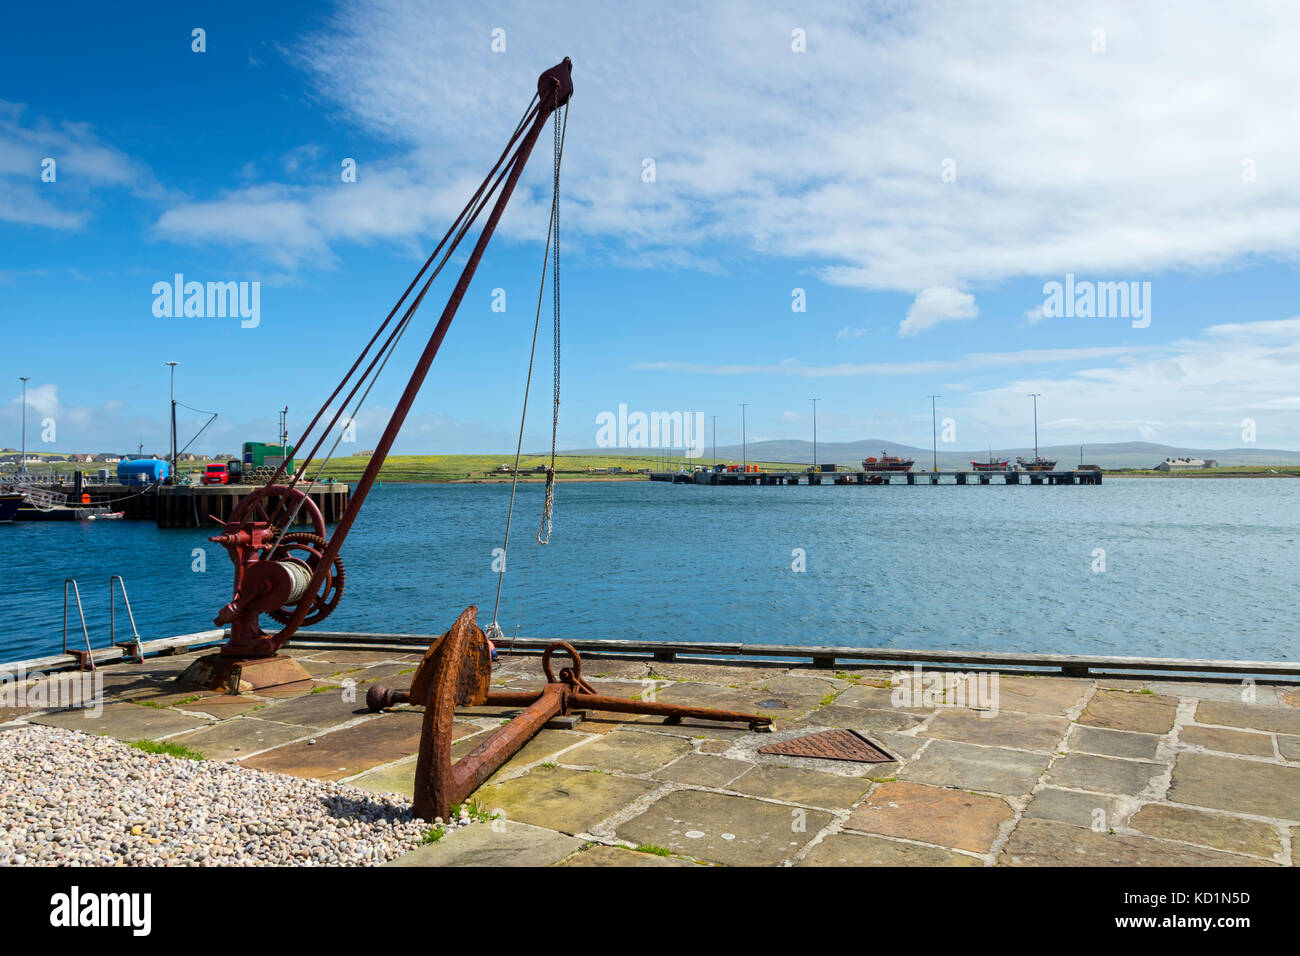 Old derrick crane and anchor at the old jetty, Stromness, Orkney Mainland, Scotland, UK.. Stock Photo